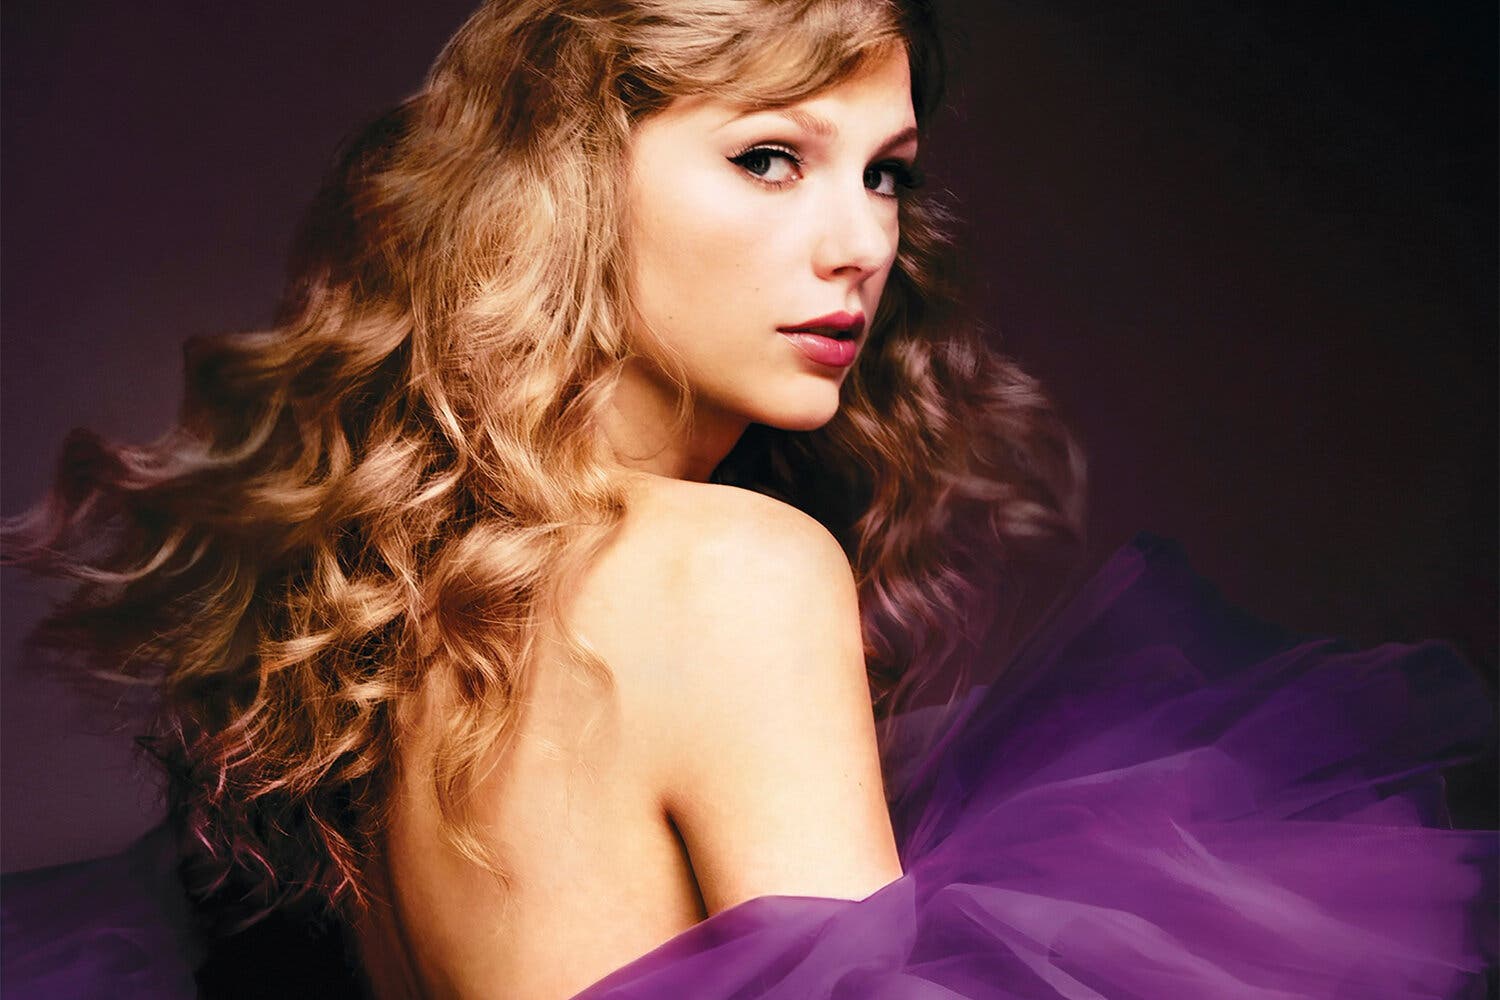 The cover image of “Speak Now,” by Taylor Swift.Credit...Republic Records, via Associated Press